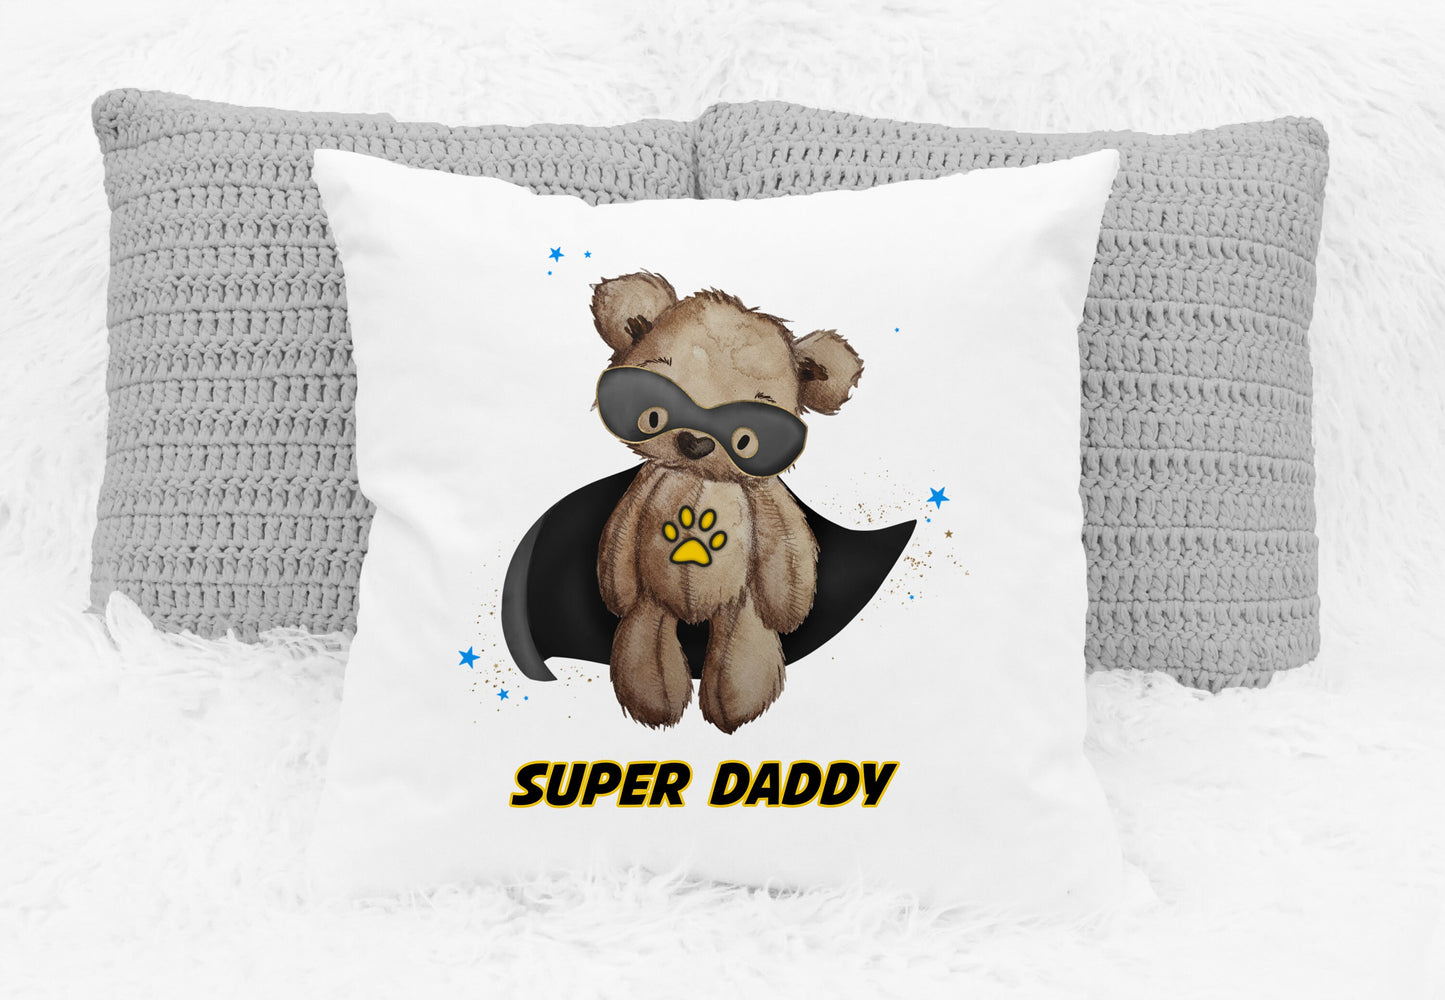 Square cushion featuring a teddy bear wearing a black cape and a black eye mask design. The text reads 'Super daddy'